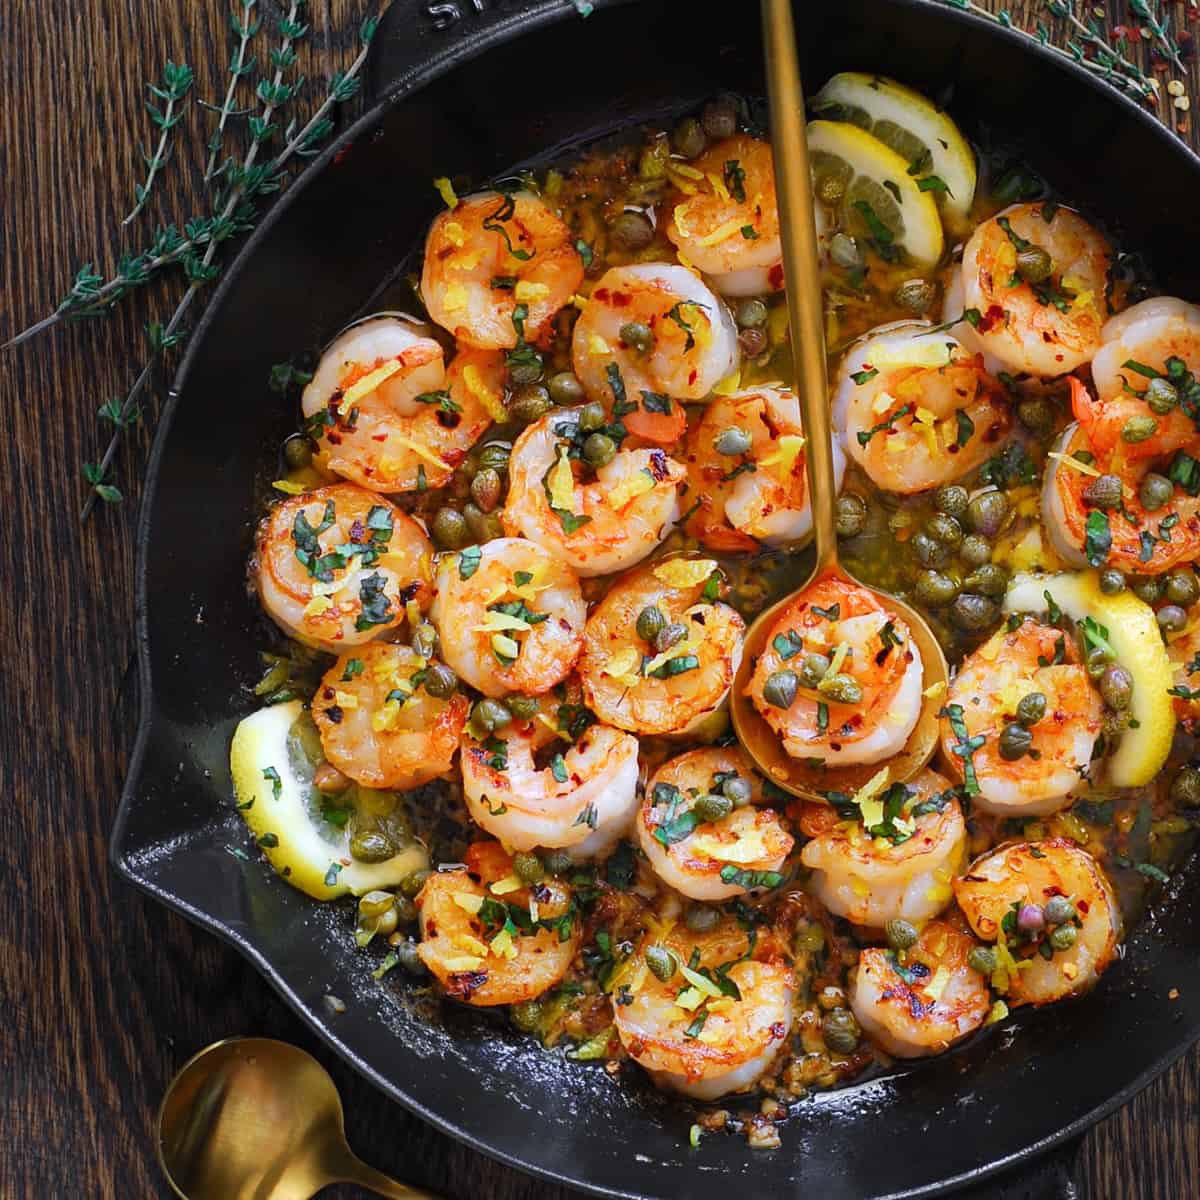 National Shrimp Scampi Day

The word “scampi” means “shrimp”.  Therefore, #ShrimpScampi” is “shrimp shrimp” (or “scampi scampi”).

Shrimp that has been broiled or sautéed, usually in butter and garlic are called “scampi”.

🦐 #NationalShrimpScampiDay #FoodOfTheDay #NobertSales